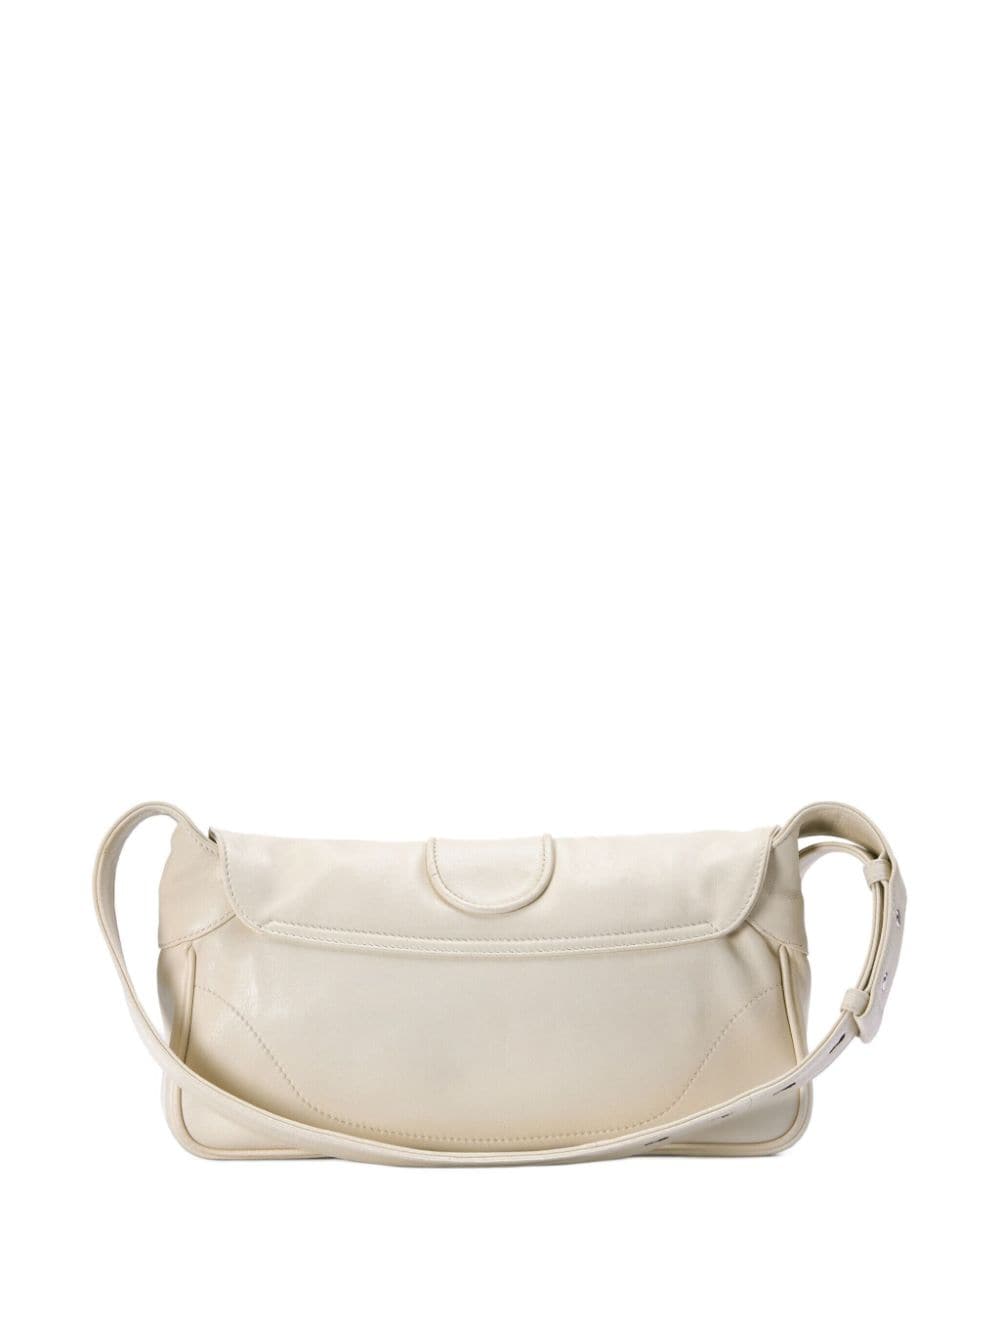 GUCCI White Leather Shoulder Handbag - Luxurious and Stylish for Women